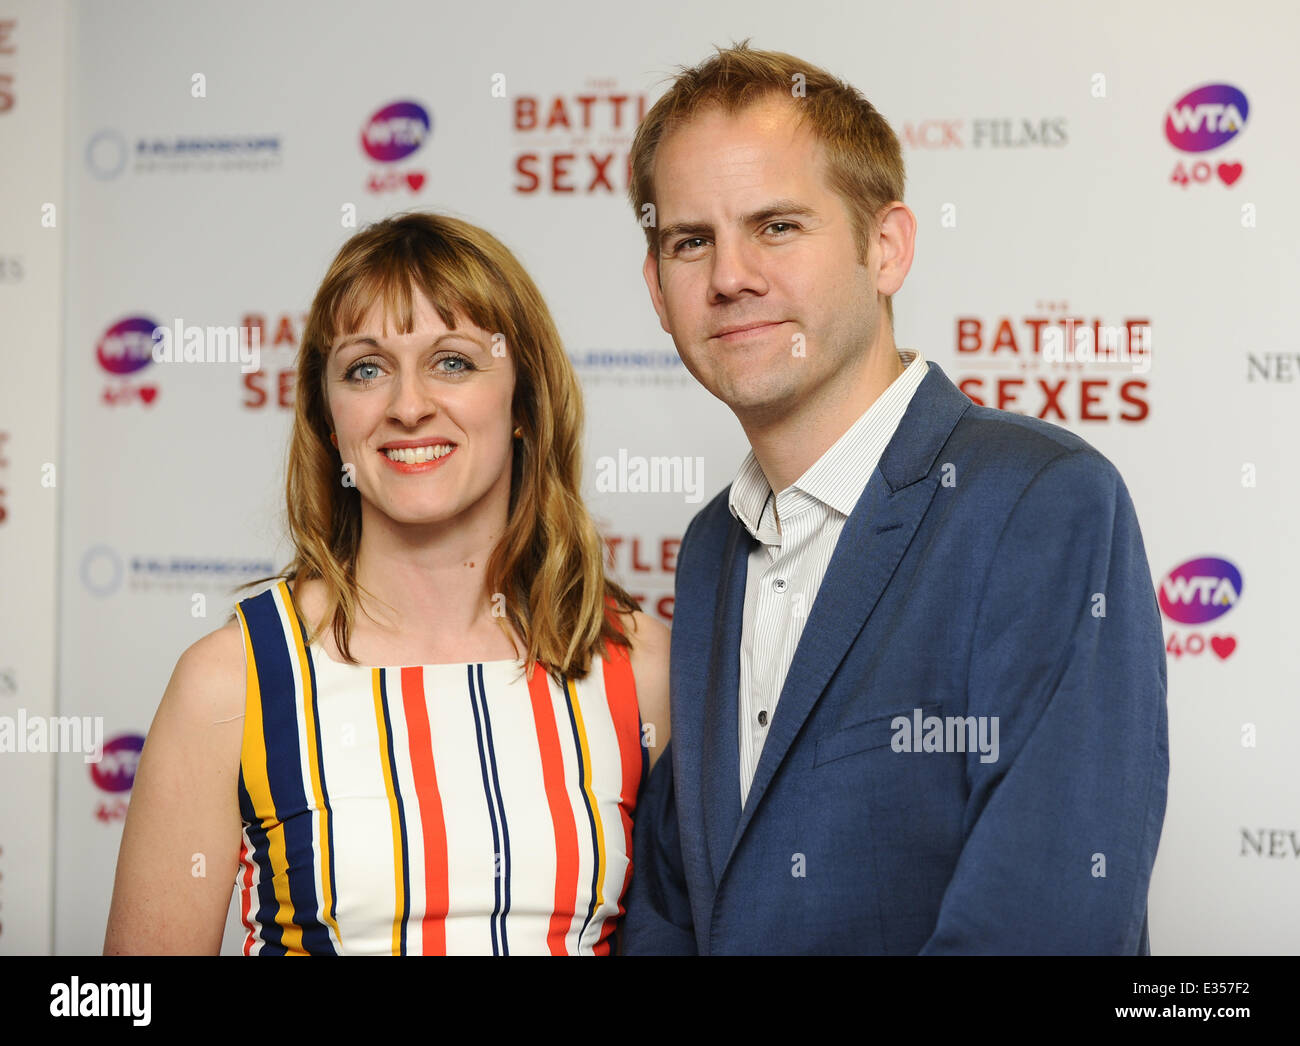 Battle Of the Sexes' U.K. premiere held at Leicester Square - Arrivals  Featuring: Zara Hayes,James Erskine Where: London, United Kingdom When: 26  Jun 2013 Stock Photo - Alamy